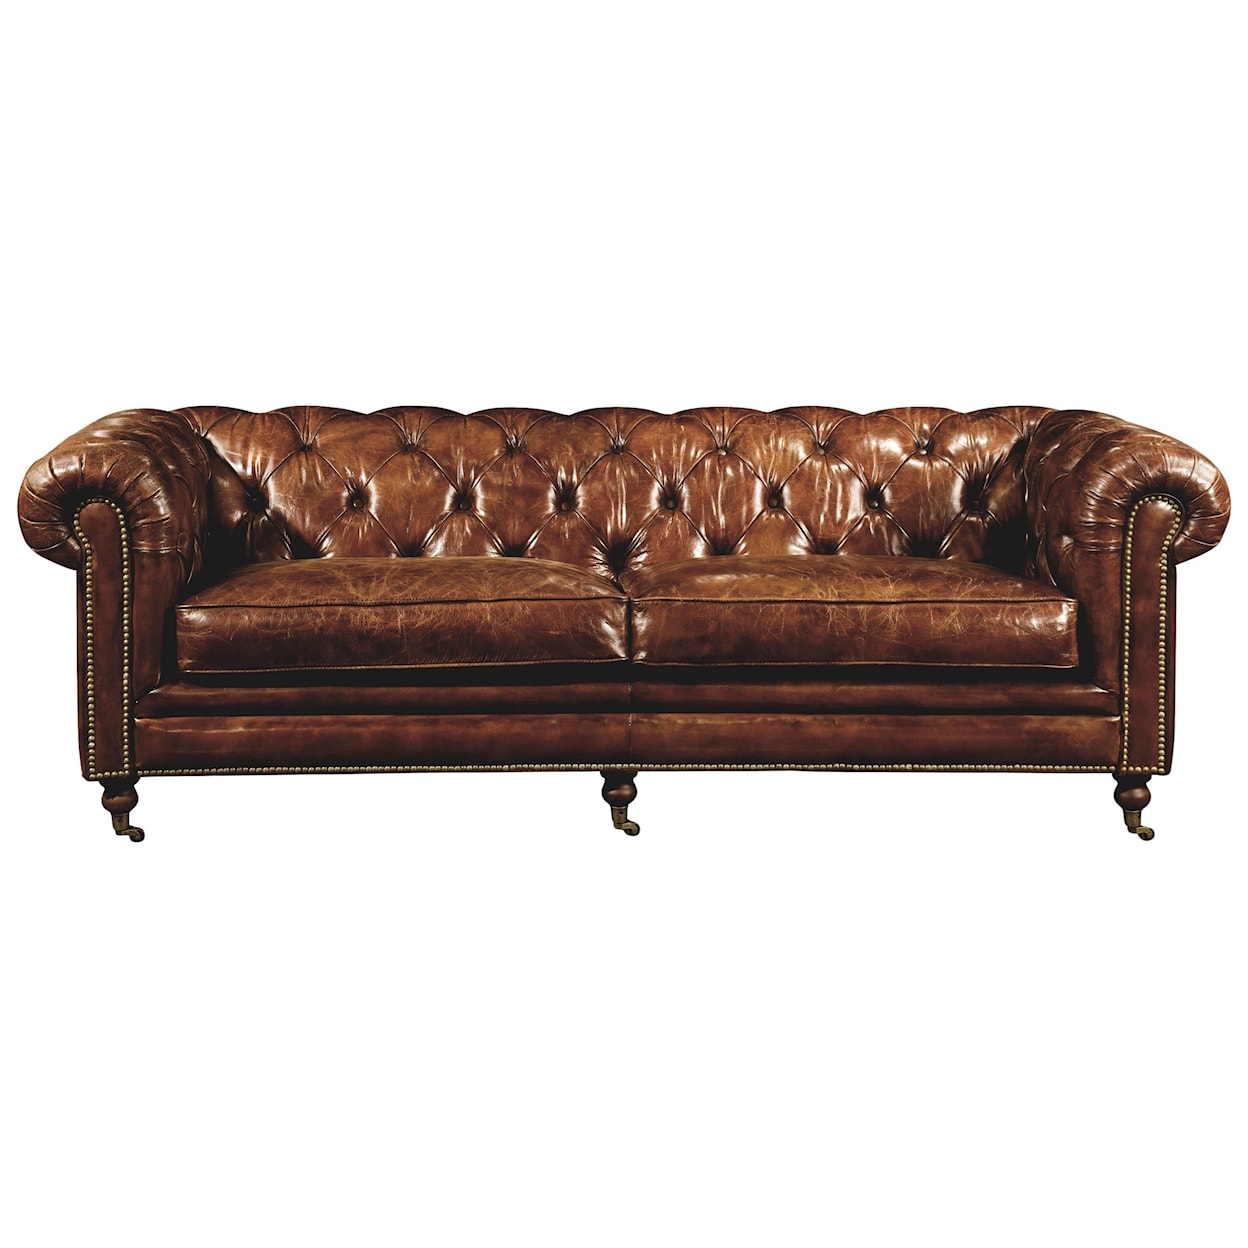 Moe's Home Collection Birmingham Tufted Top Grain Leather Sofa